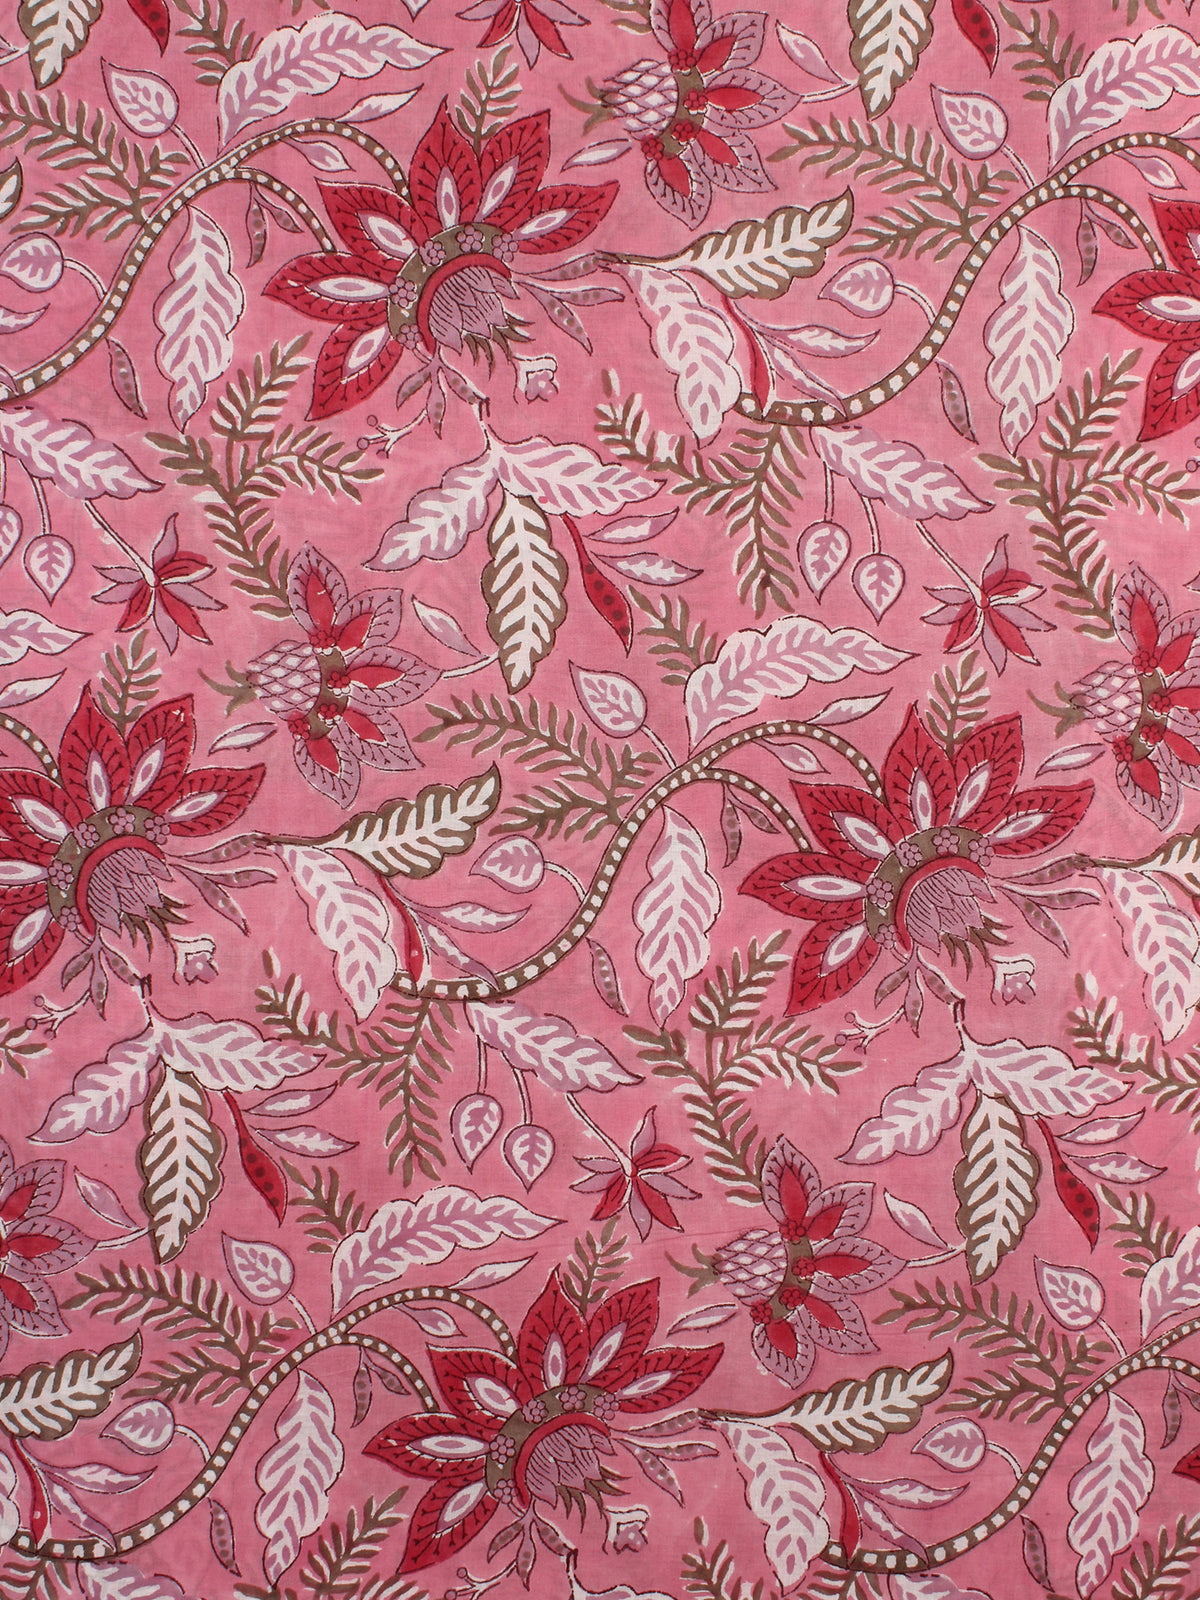 Pink Red White Hand Block Printed Cotton Fabric Per Meter - F001F2348